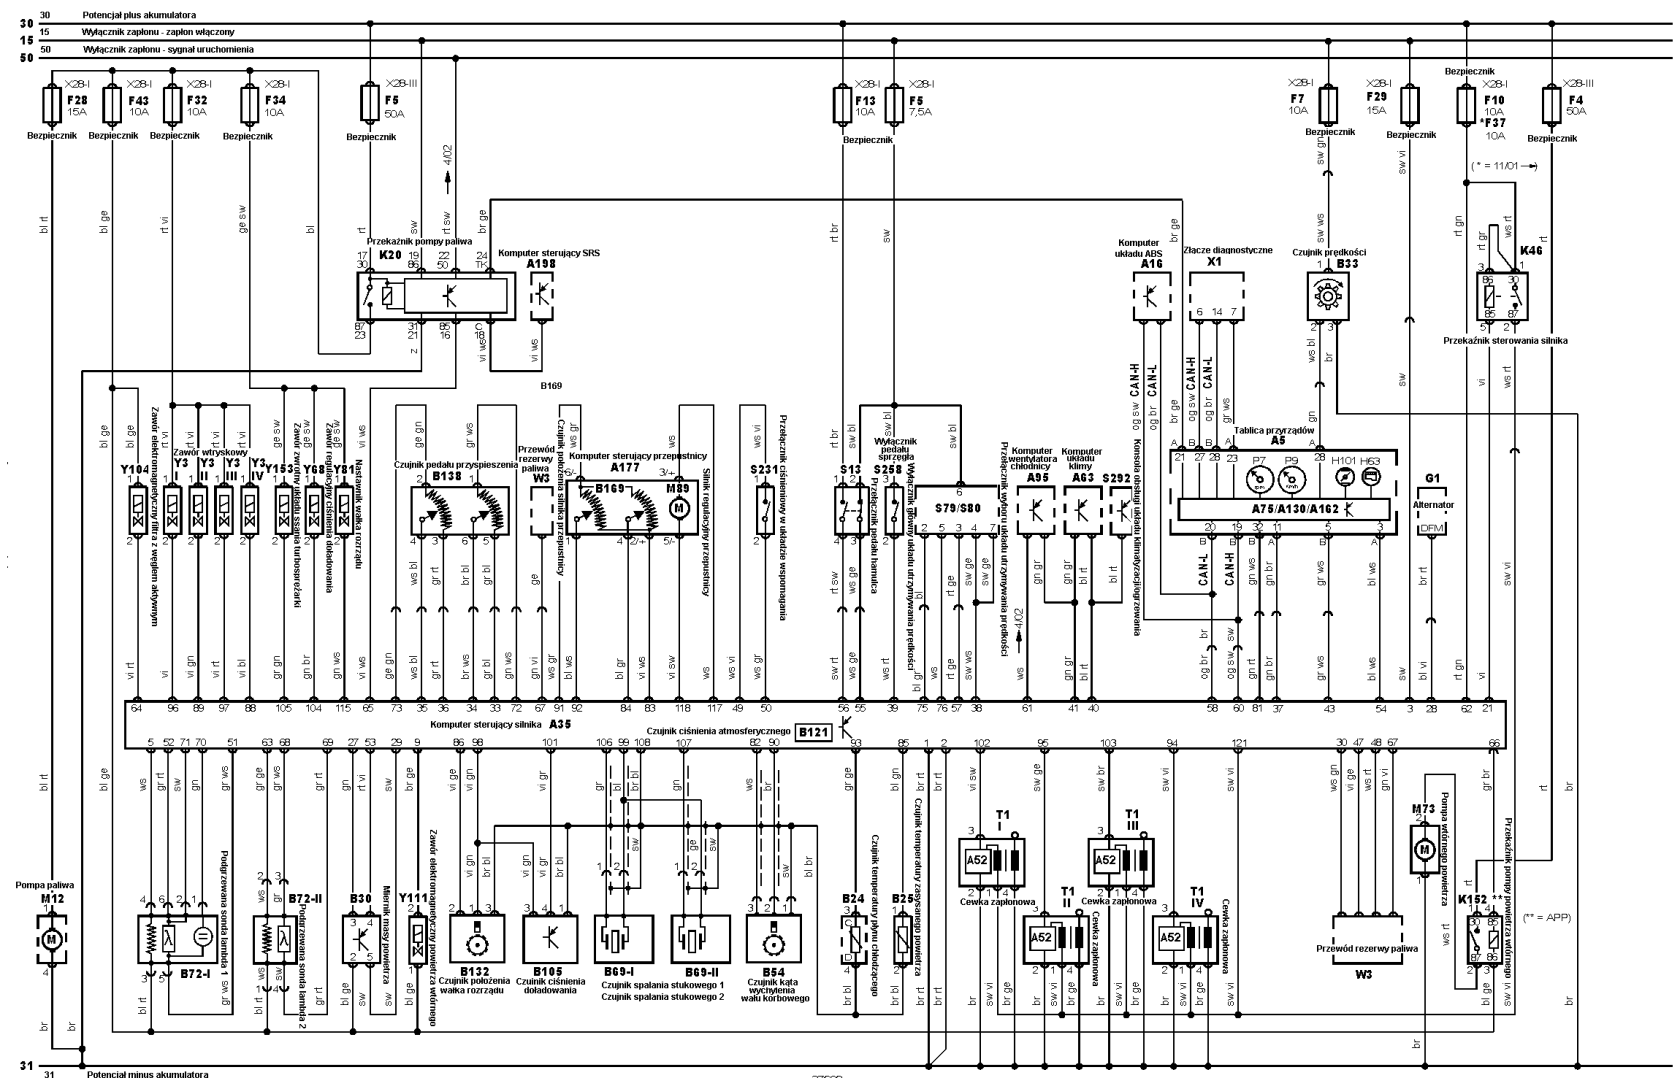 Wiring Diagram For The 1 8t Auq Engine